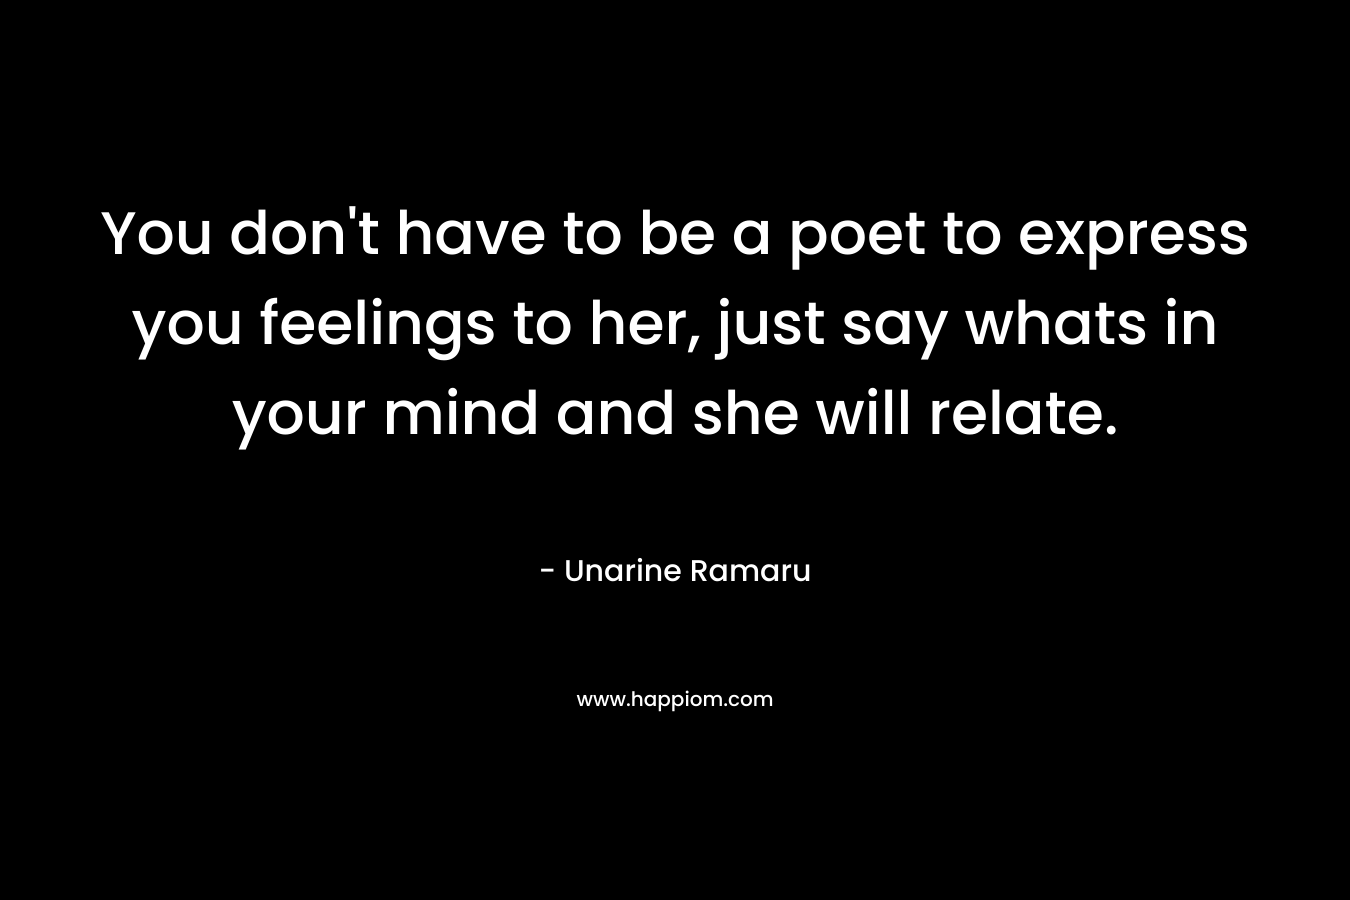 You don't have to be a poet to express you feelings to her, just say whats in your mind and she will relate.